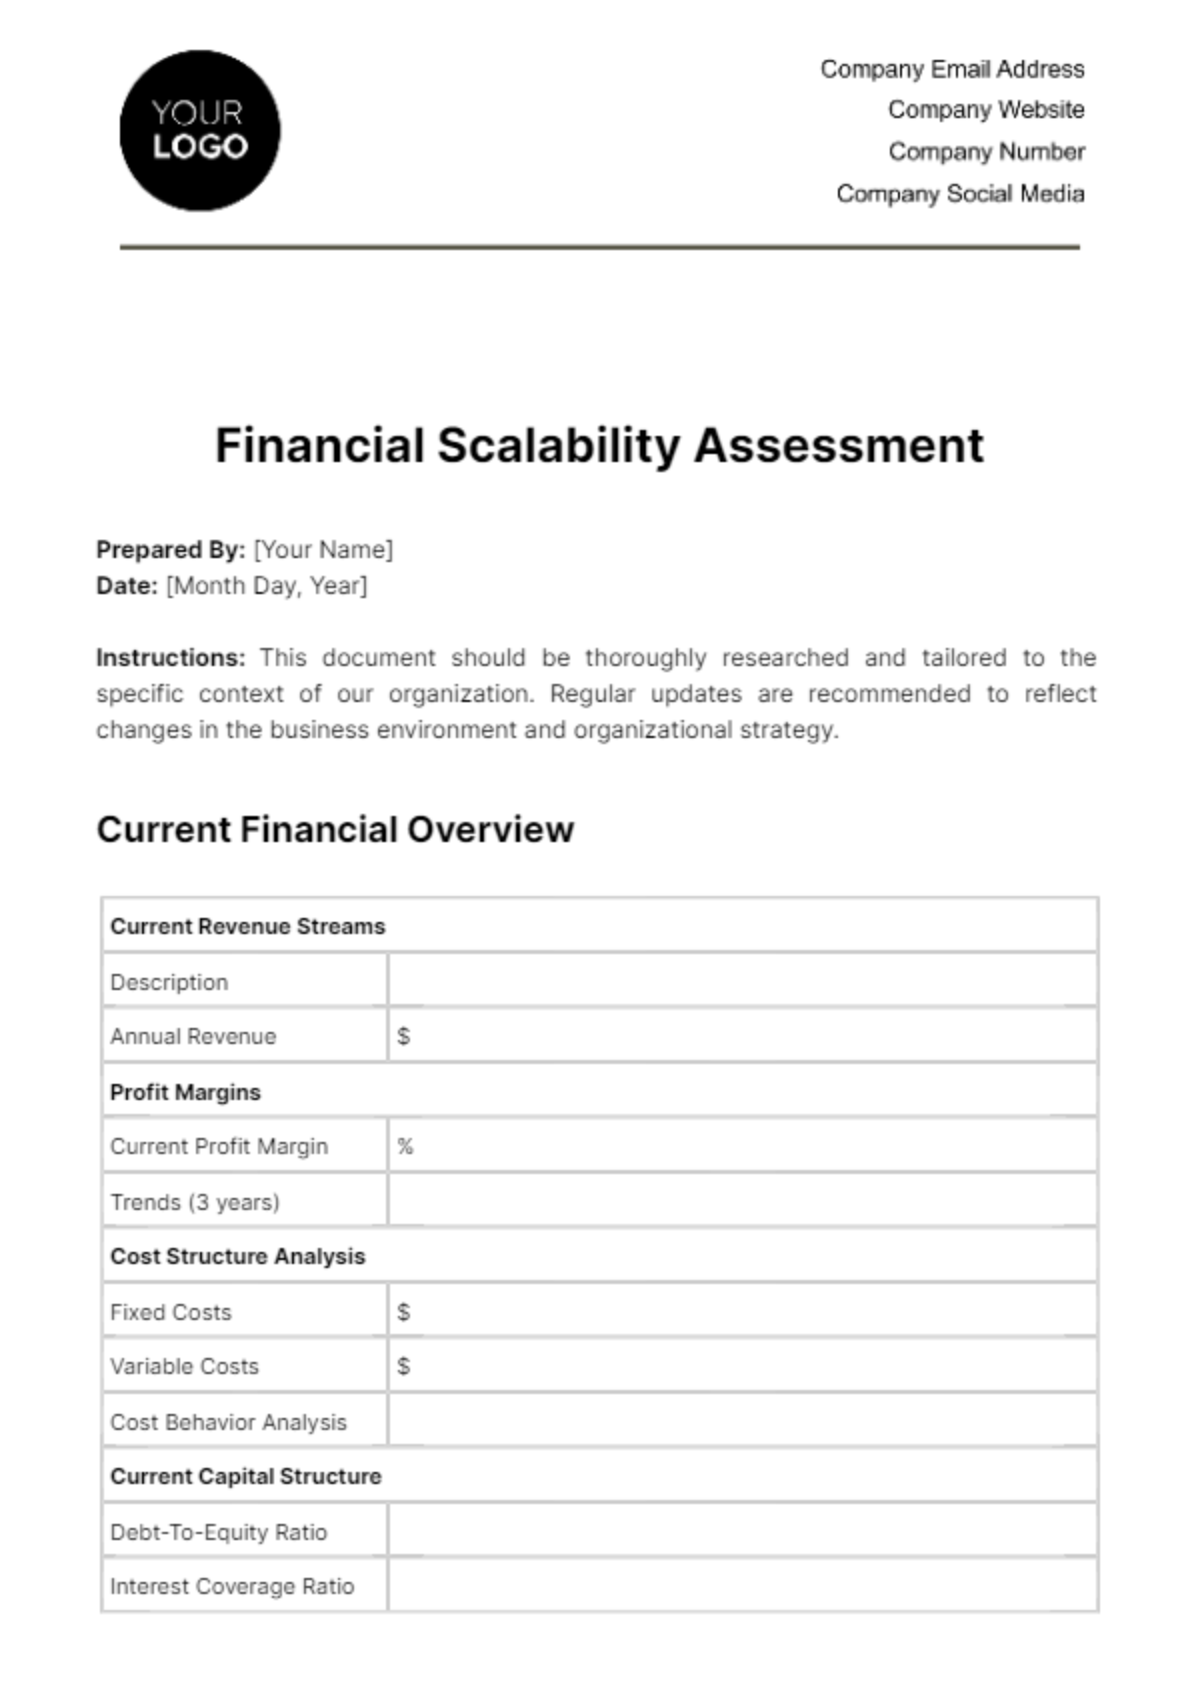 Free Financial Scalability Assessment Template